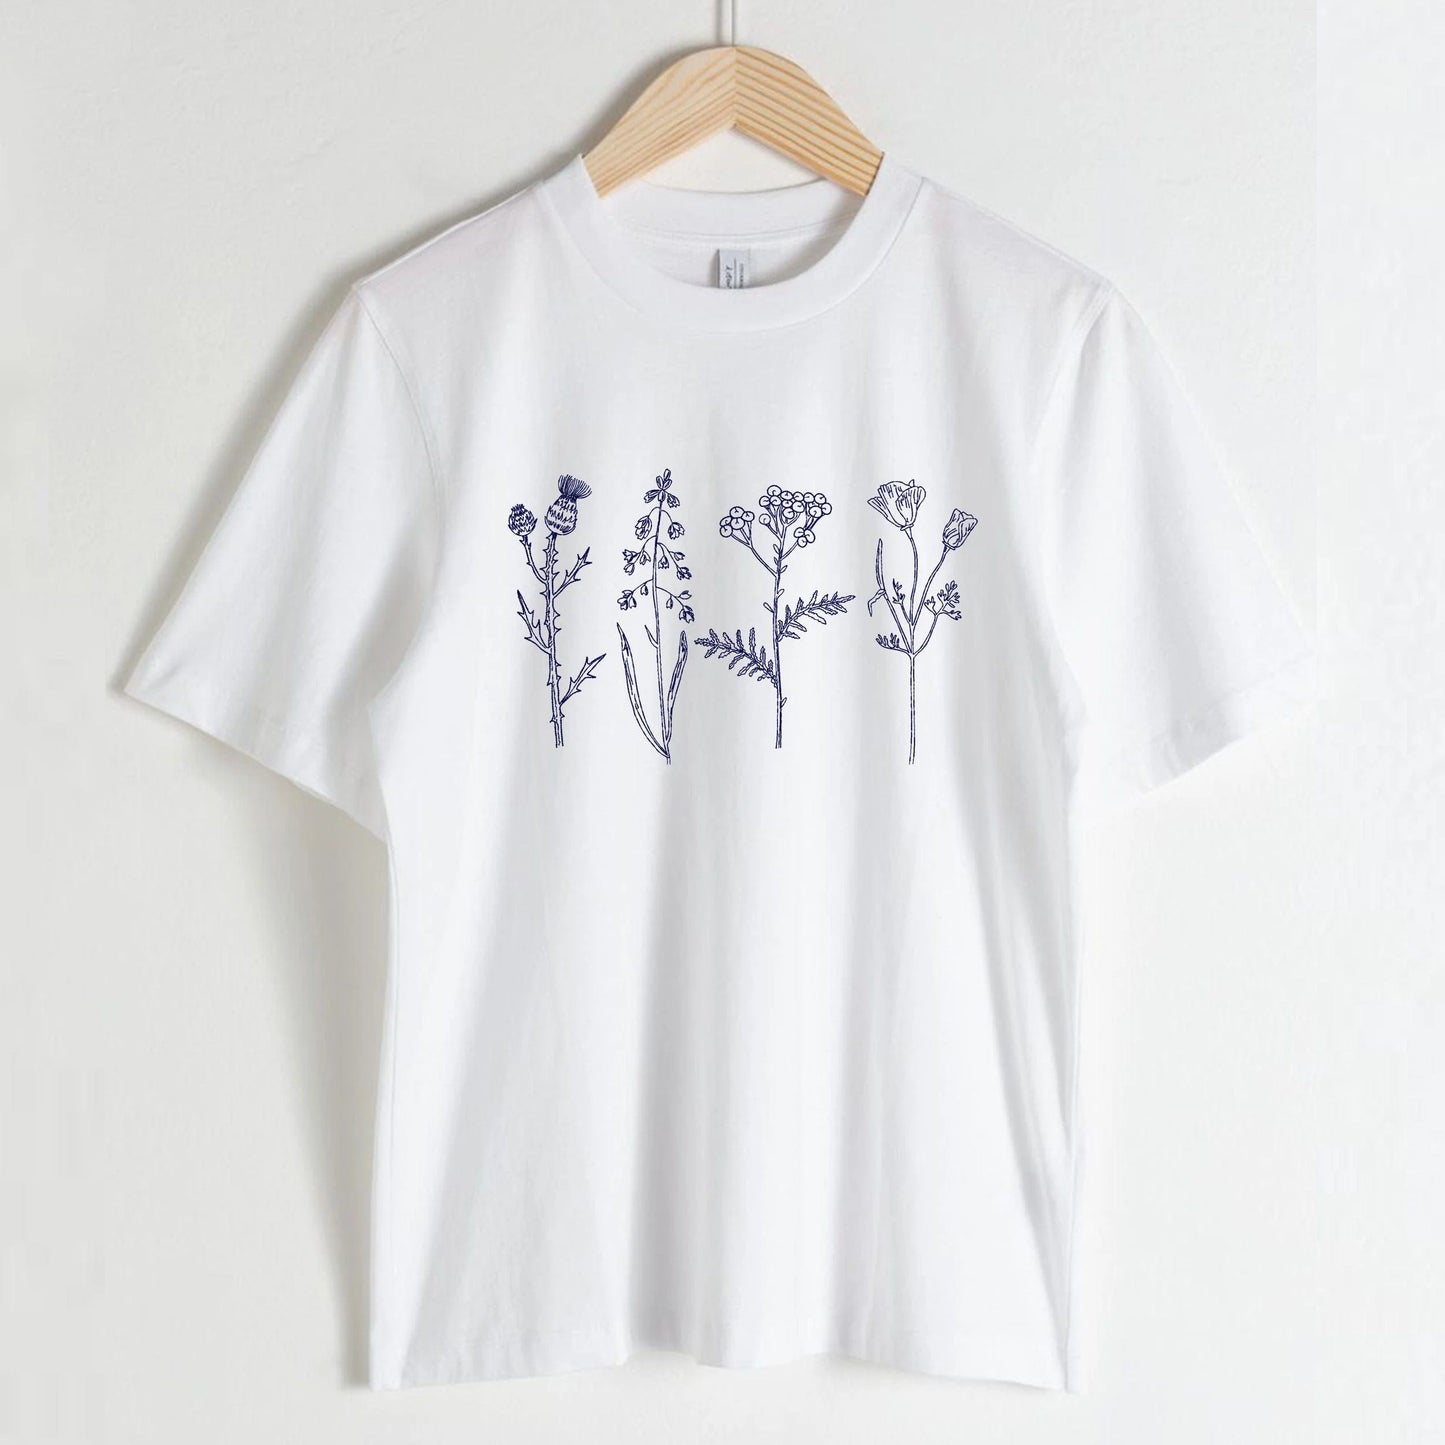 Chinoiserie Meadow Flowers Machine Embroidery Design on t-shirt